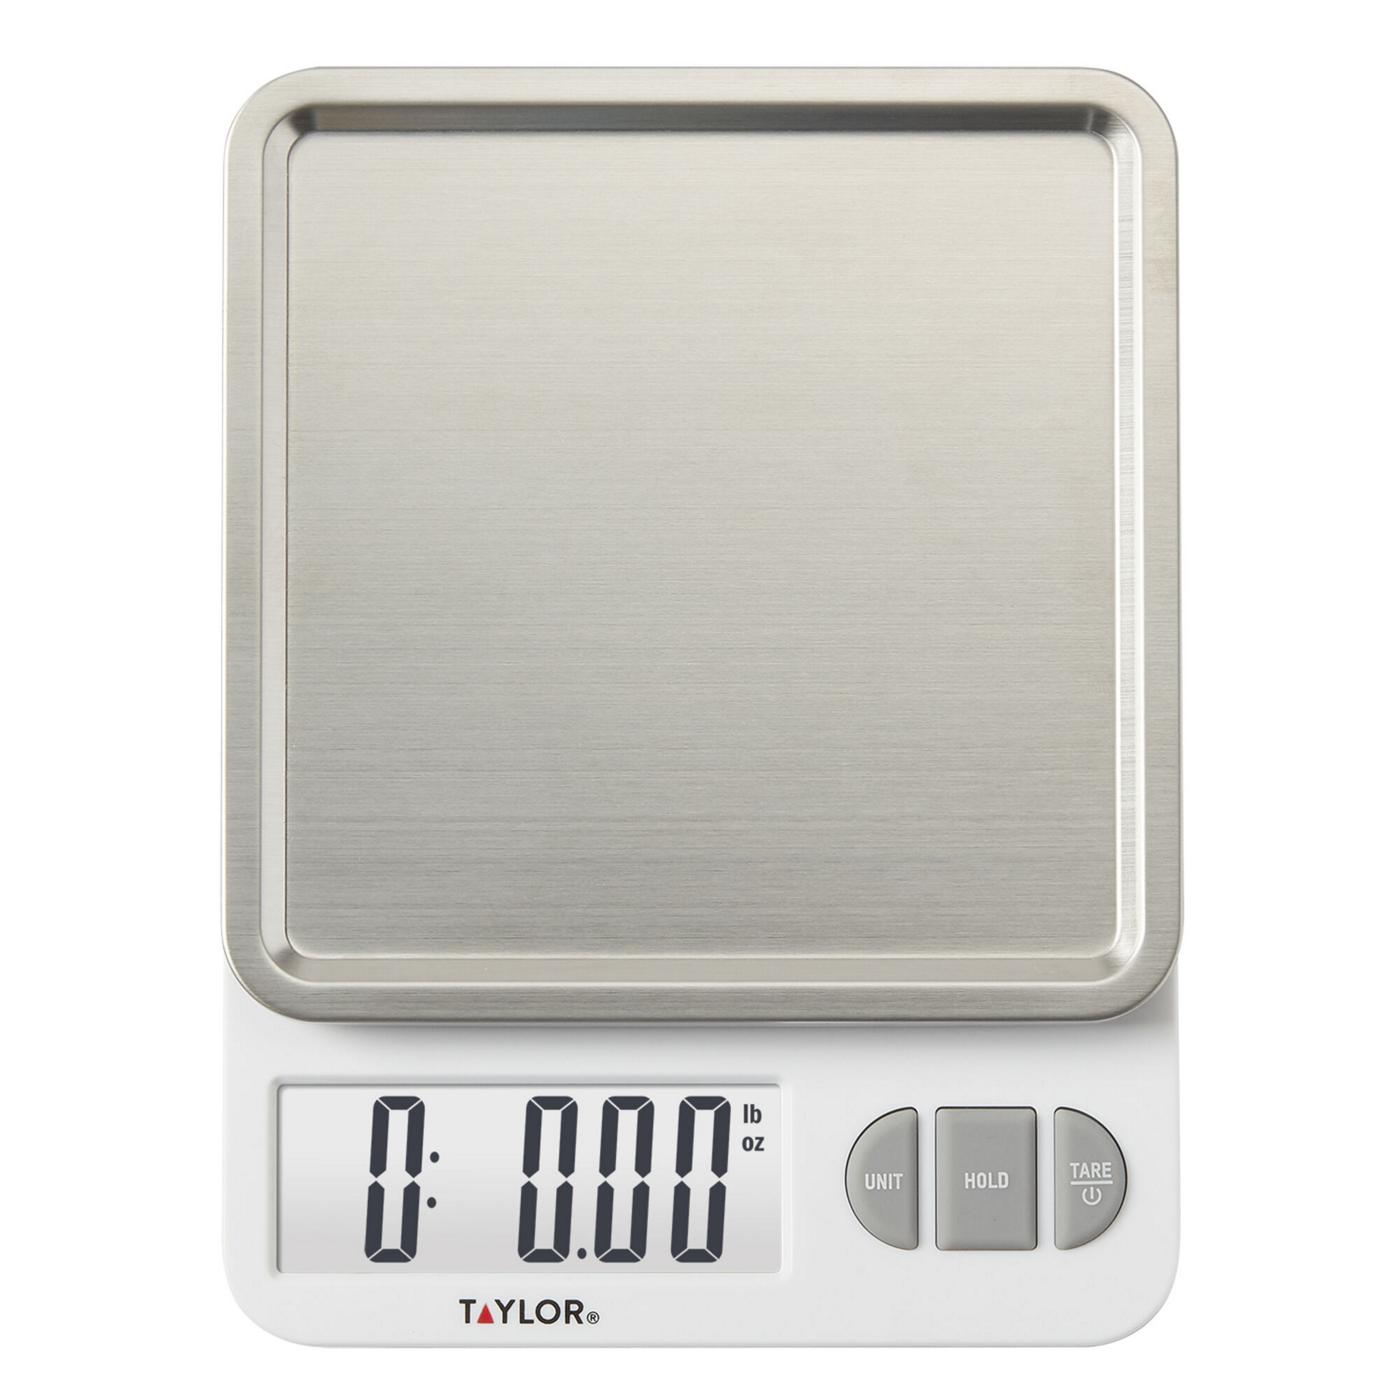 Taylor Stainless Steel Digital Kitchen Scale; image 2 of 3